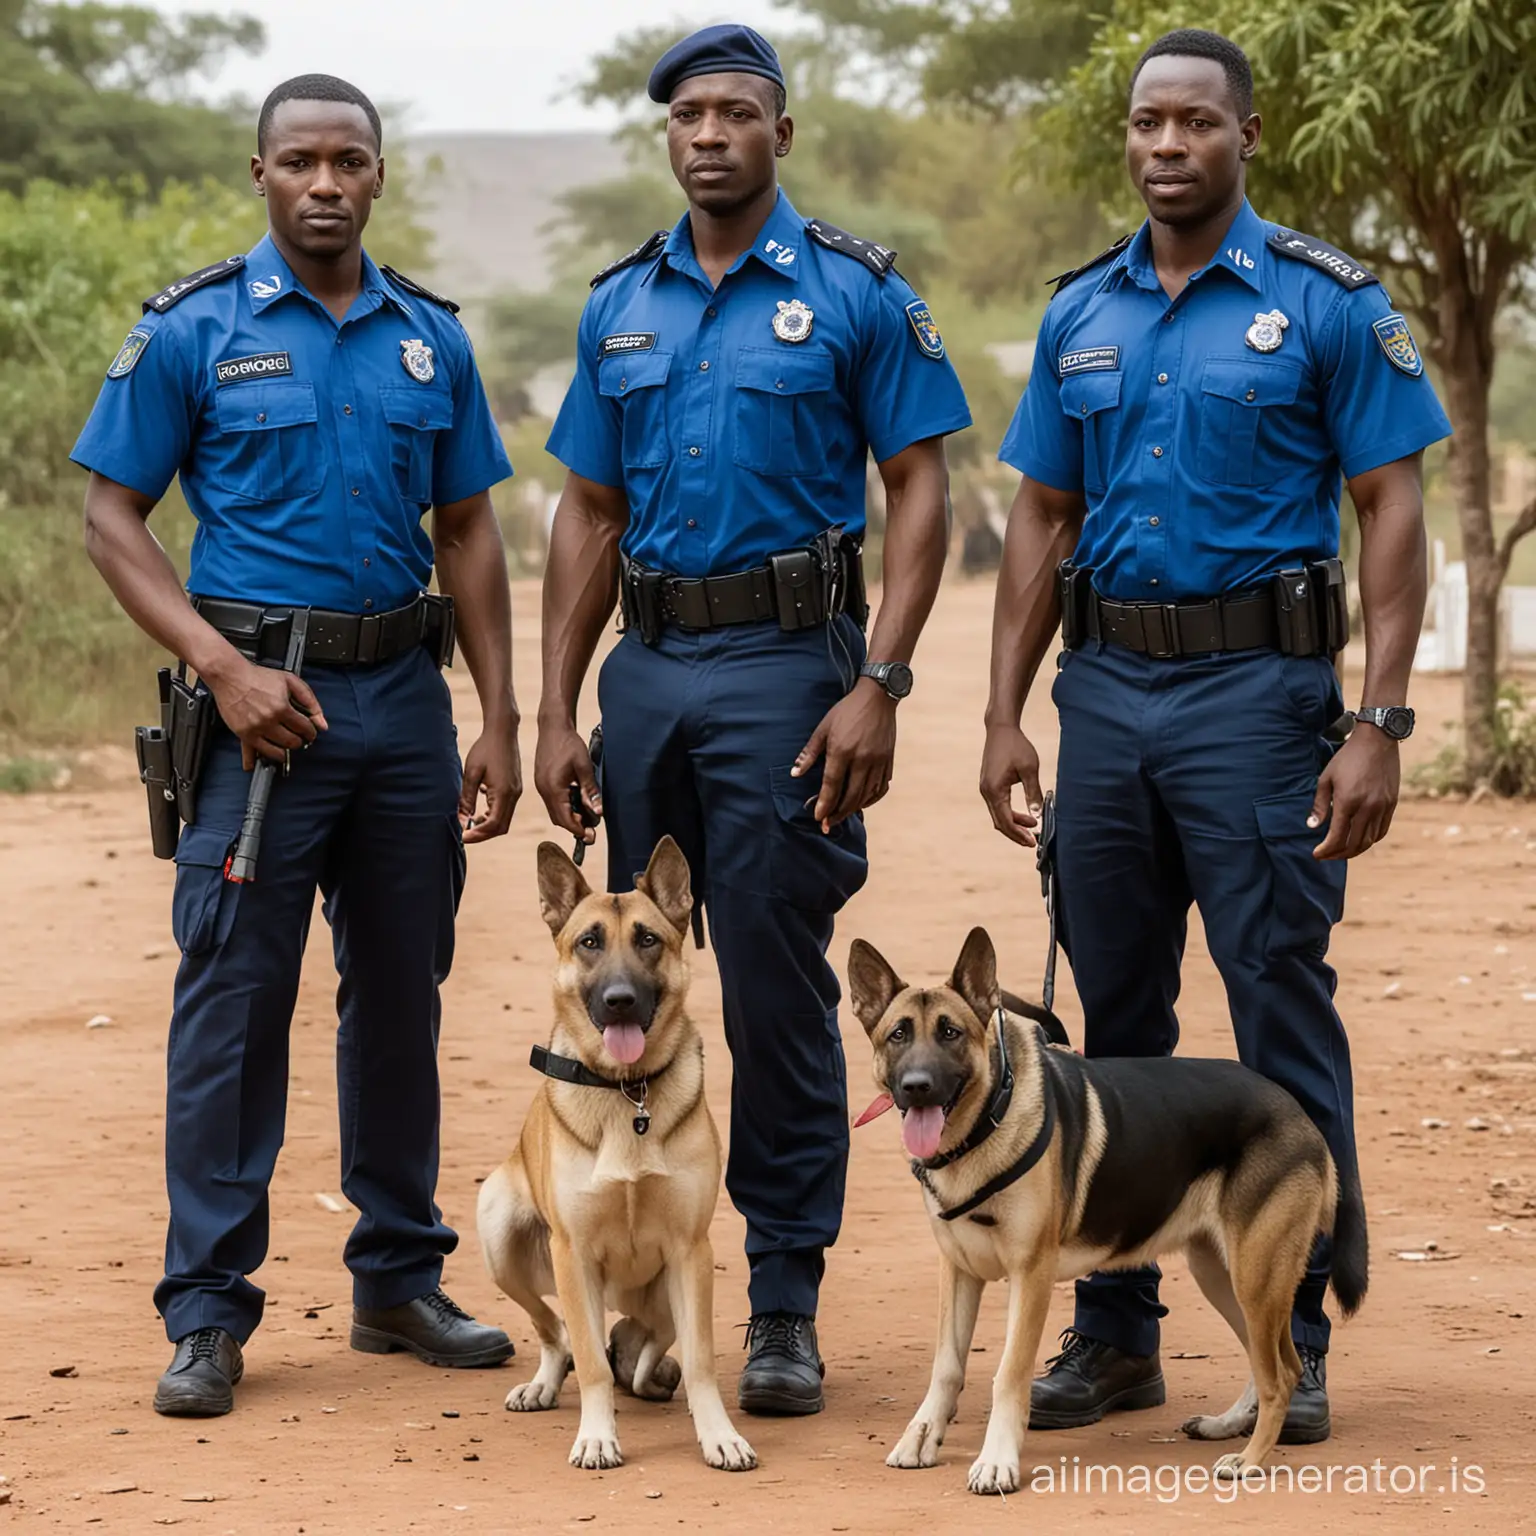 On African security staff well equip,  wearing inform of color: #6495ED “bleu” as shirt and black pants., with security dogs Appearing as well trained security guards. 